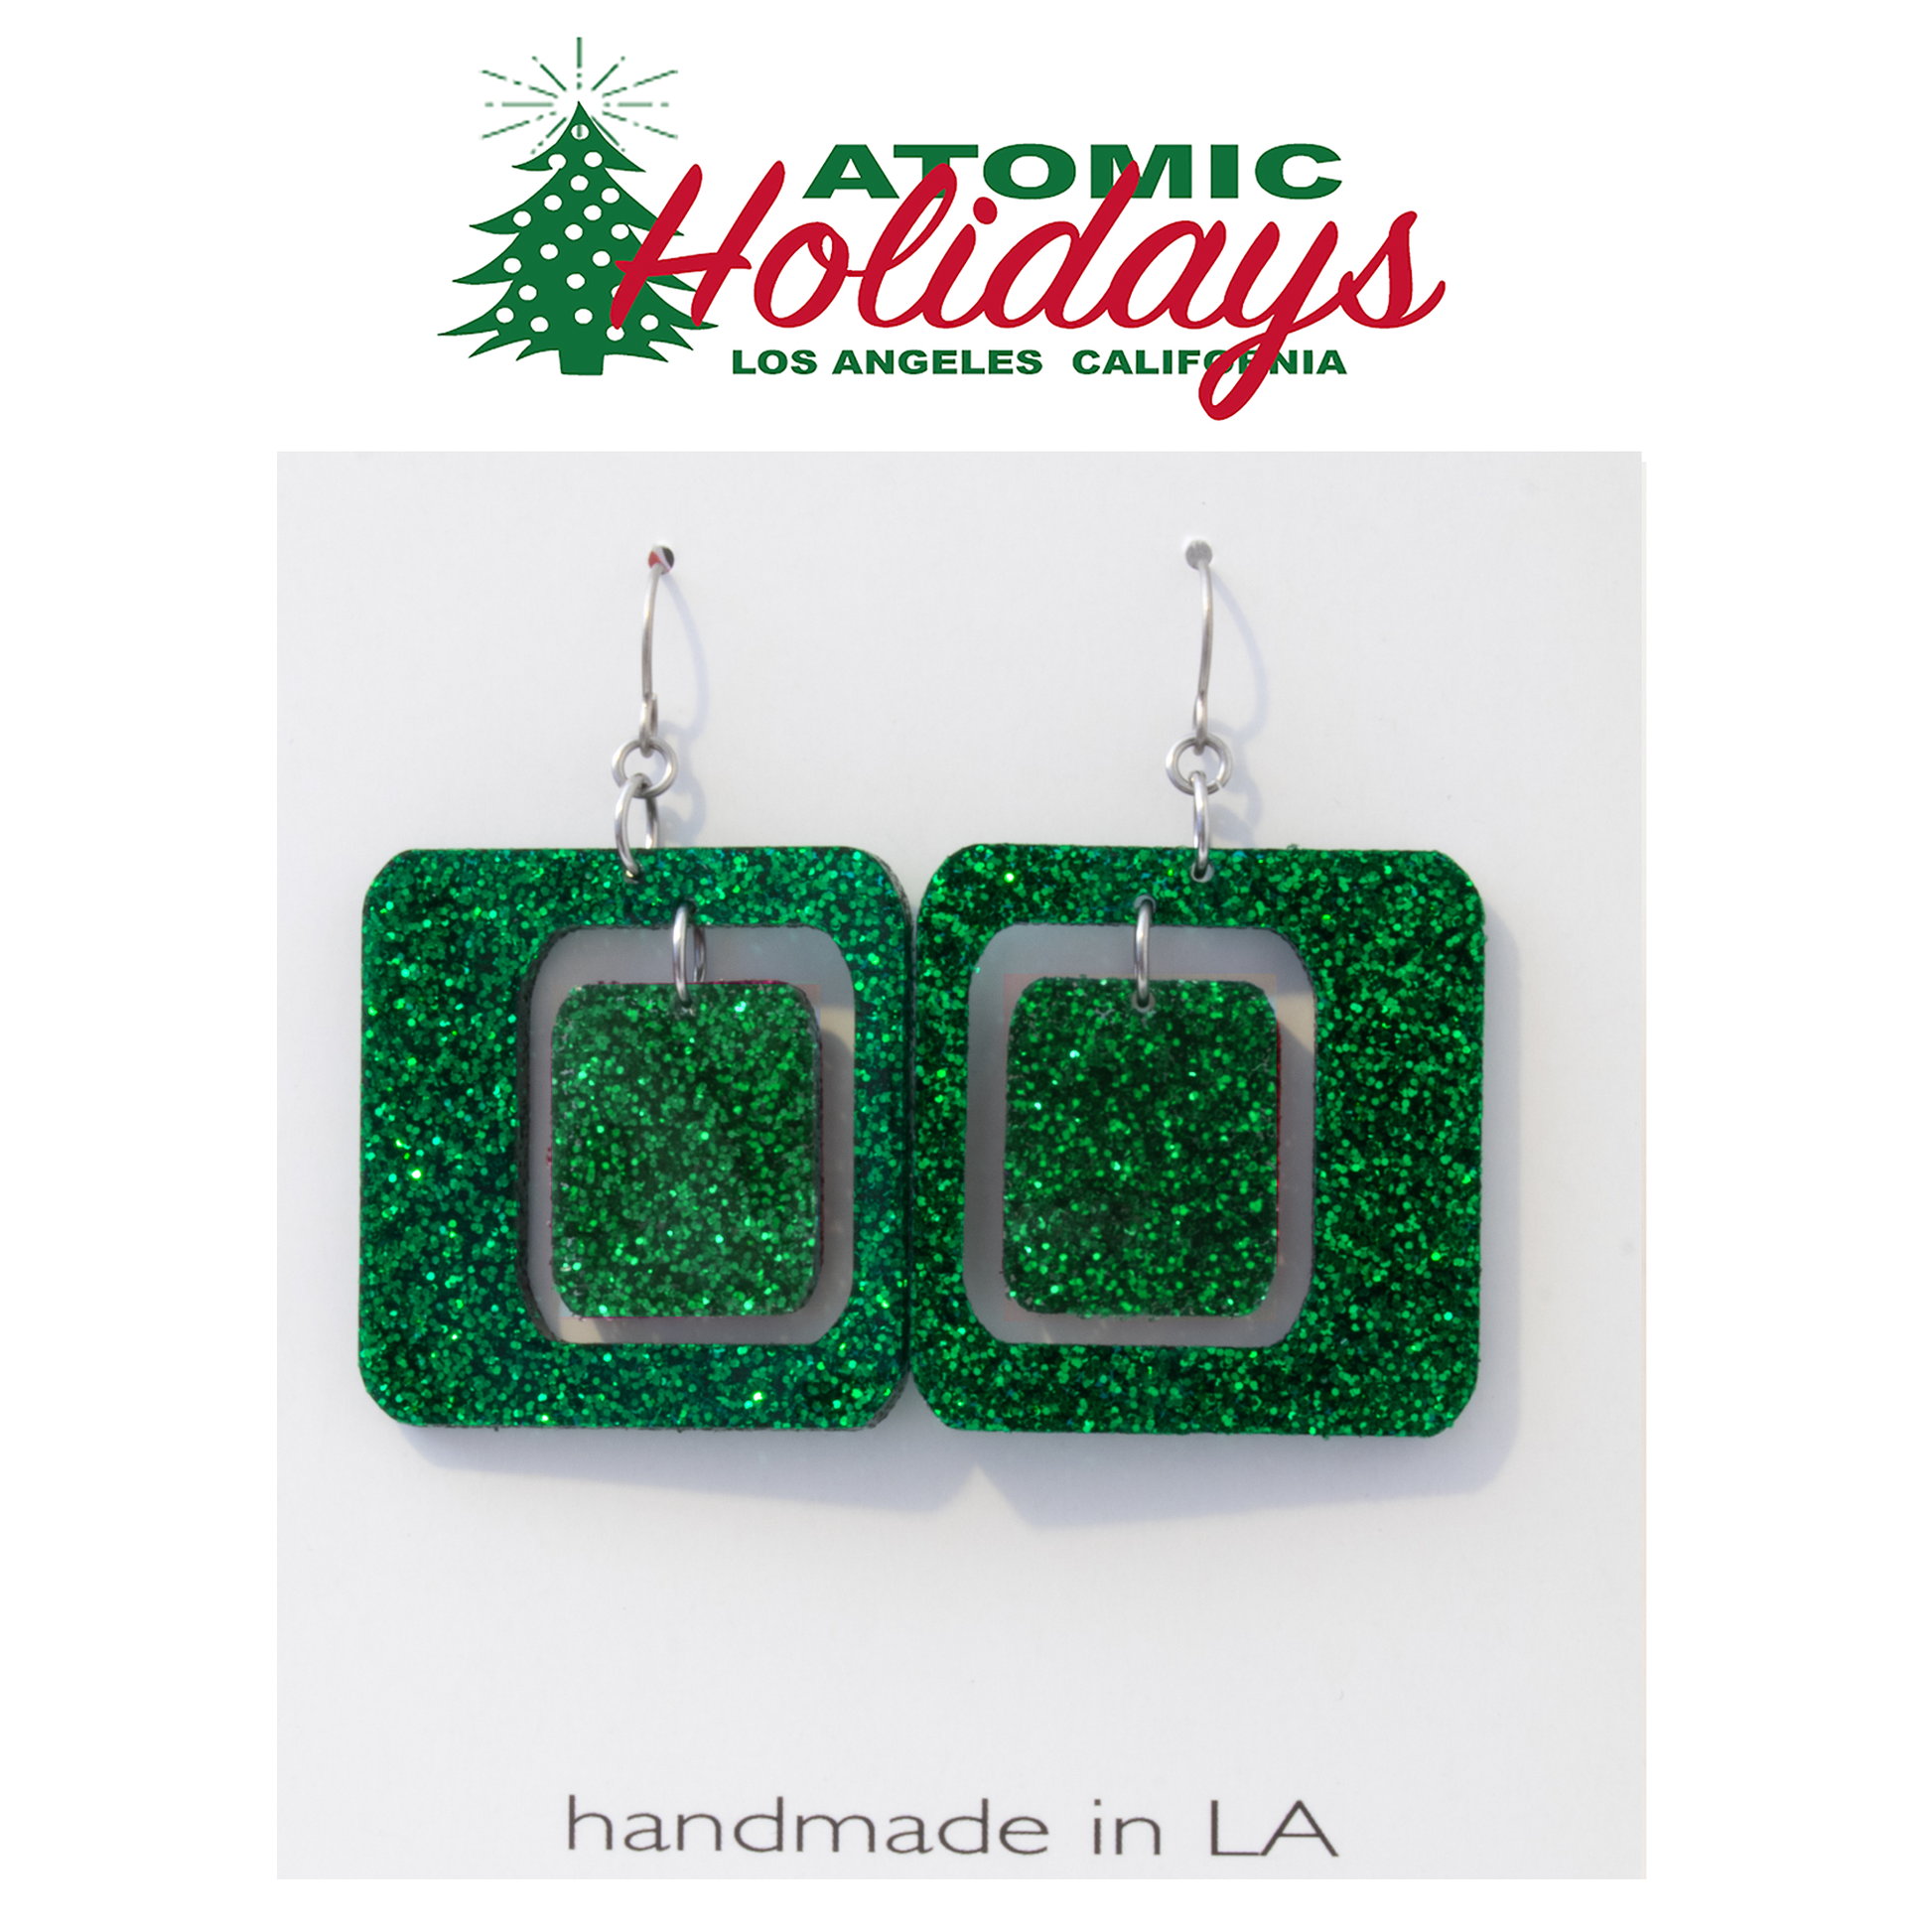 Atomic Holidays Statement Christmas Earrings in Glitter Green - mid century modern Coolsville style by AtomicMobiles.com